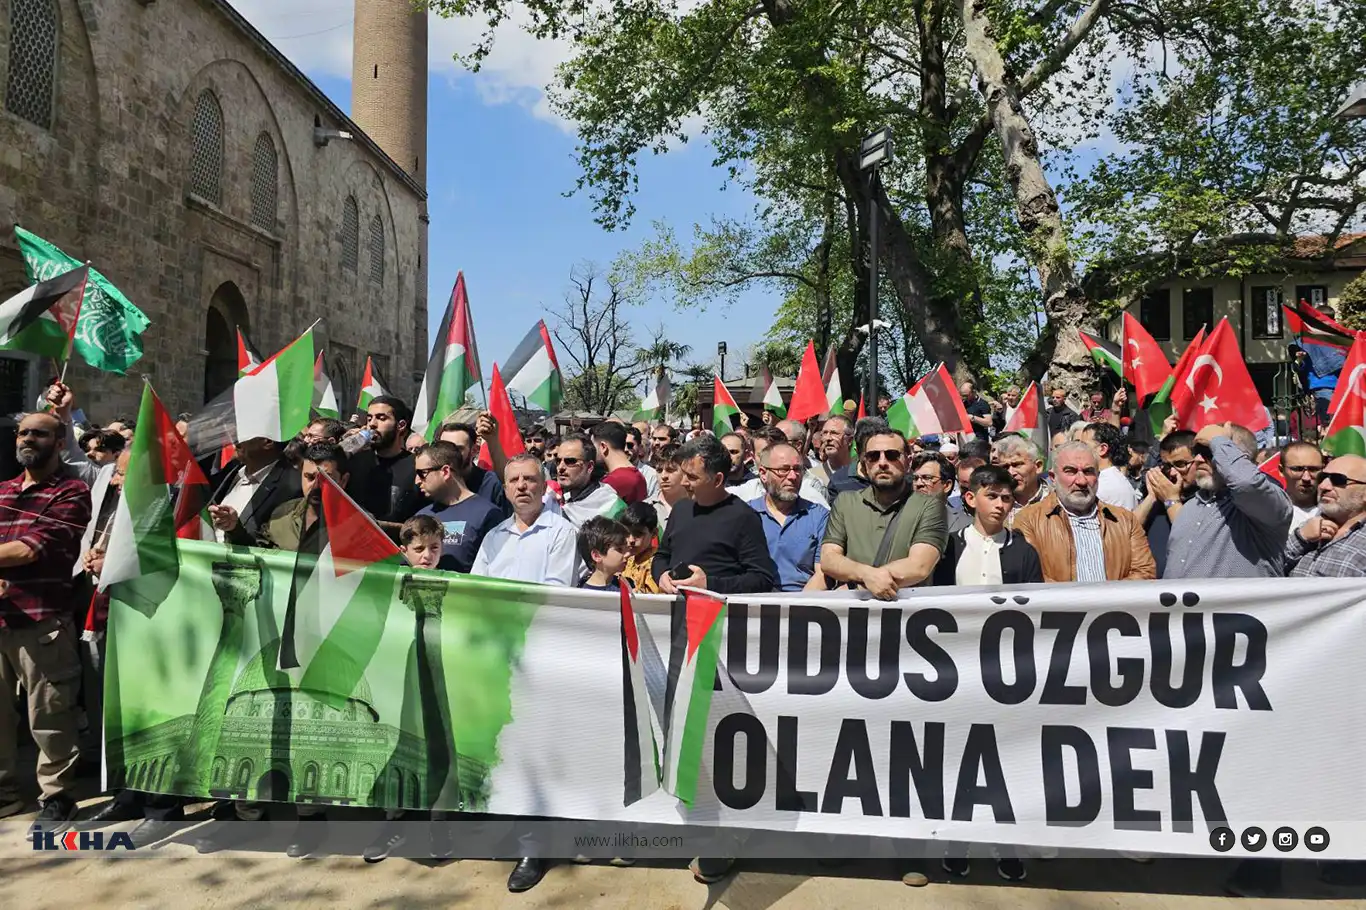 Bursa stands with Palestine: Funeral prayer for Gaza victims conveys solidarity